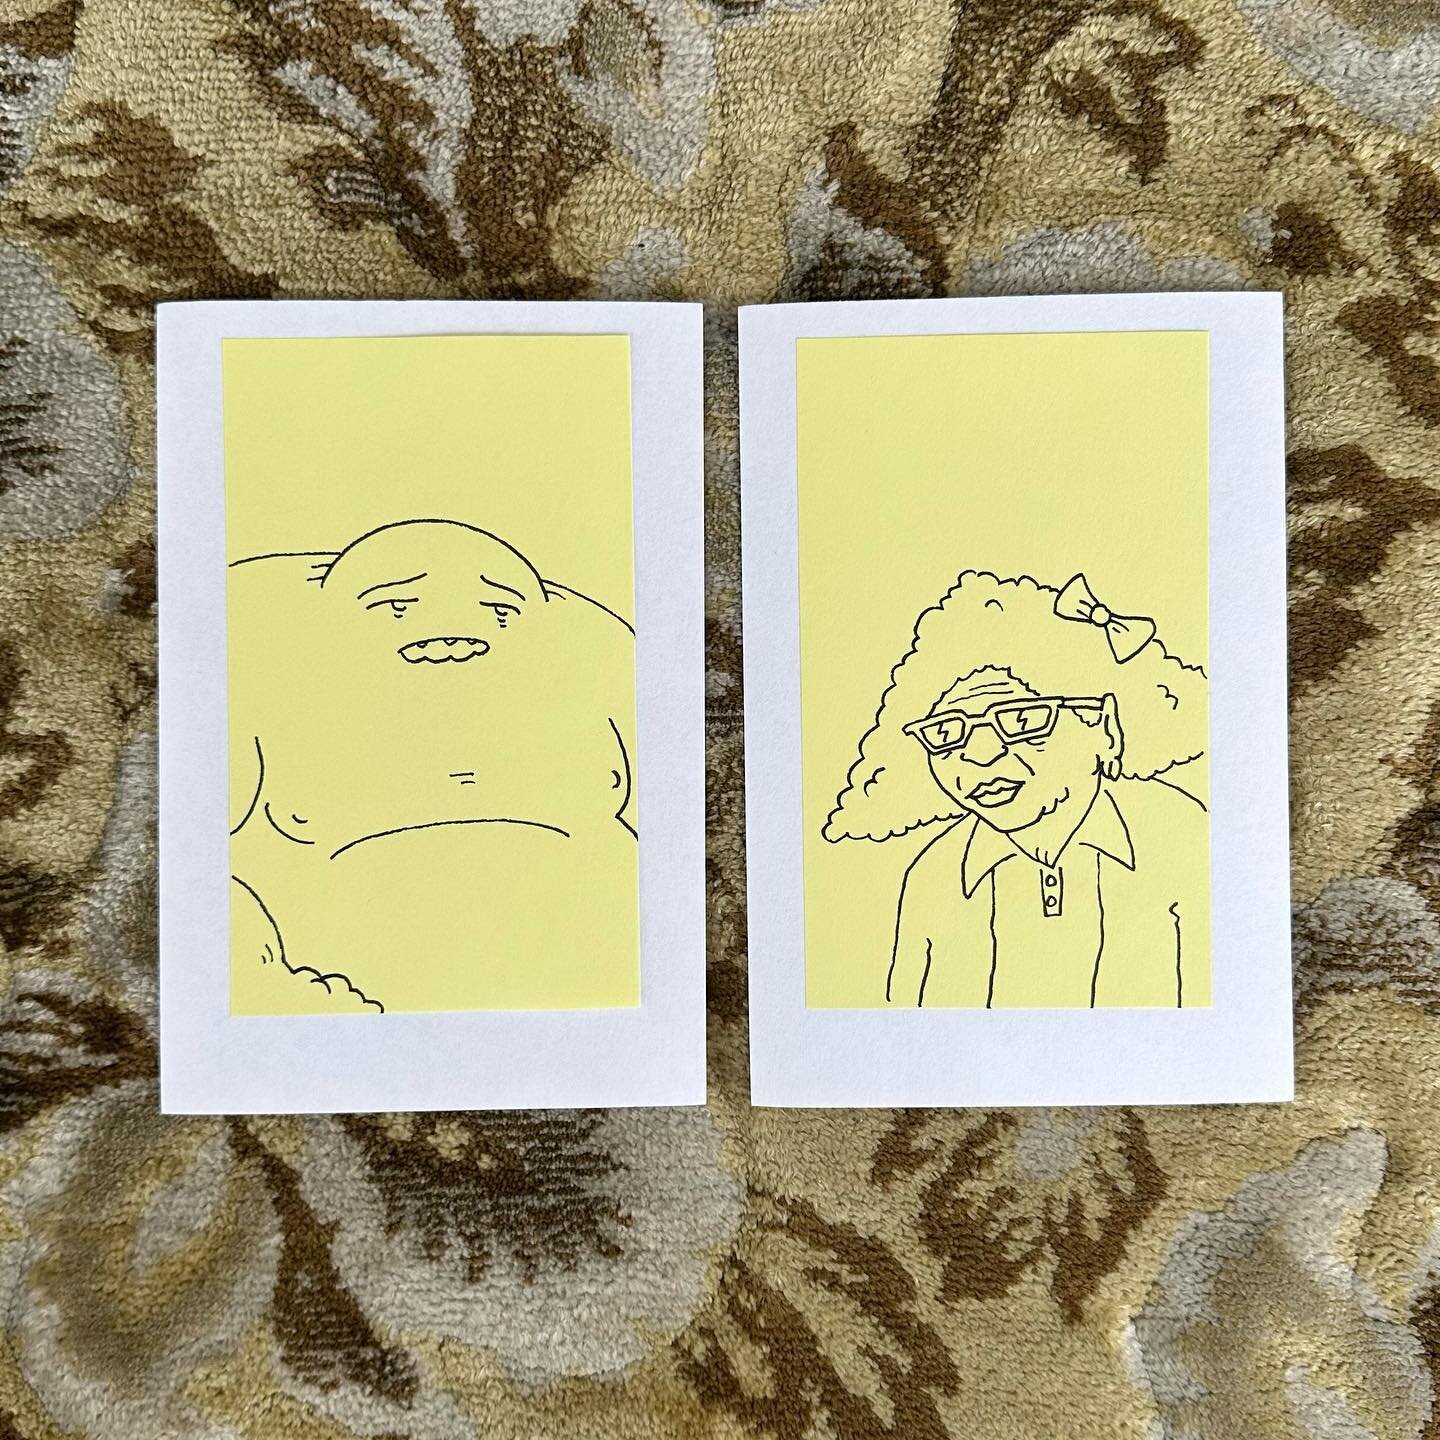 🎺 Presale tickets for the July 28th Hamby premiere event in Minneapolis each come with an original hand-drawn post-it of Hamby or Ruto. Easy to frame on a 4x6 card. Dupe your friend into coming and get them both! Ticket link in bio and story! 🎟️